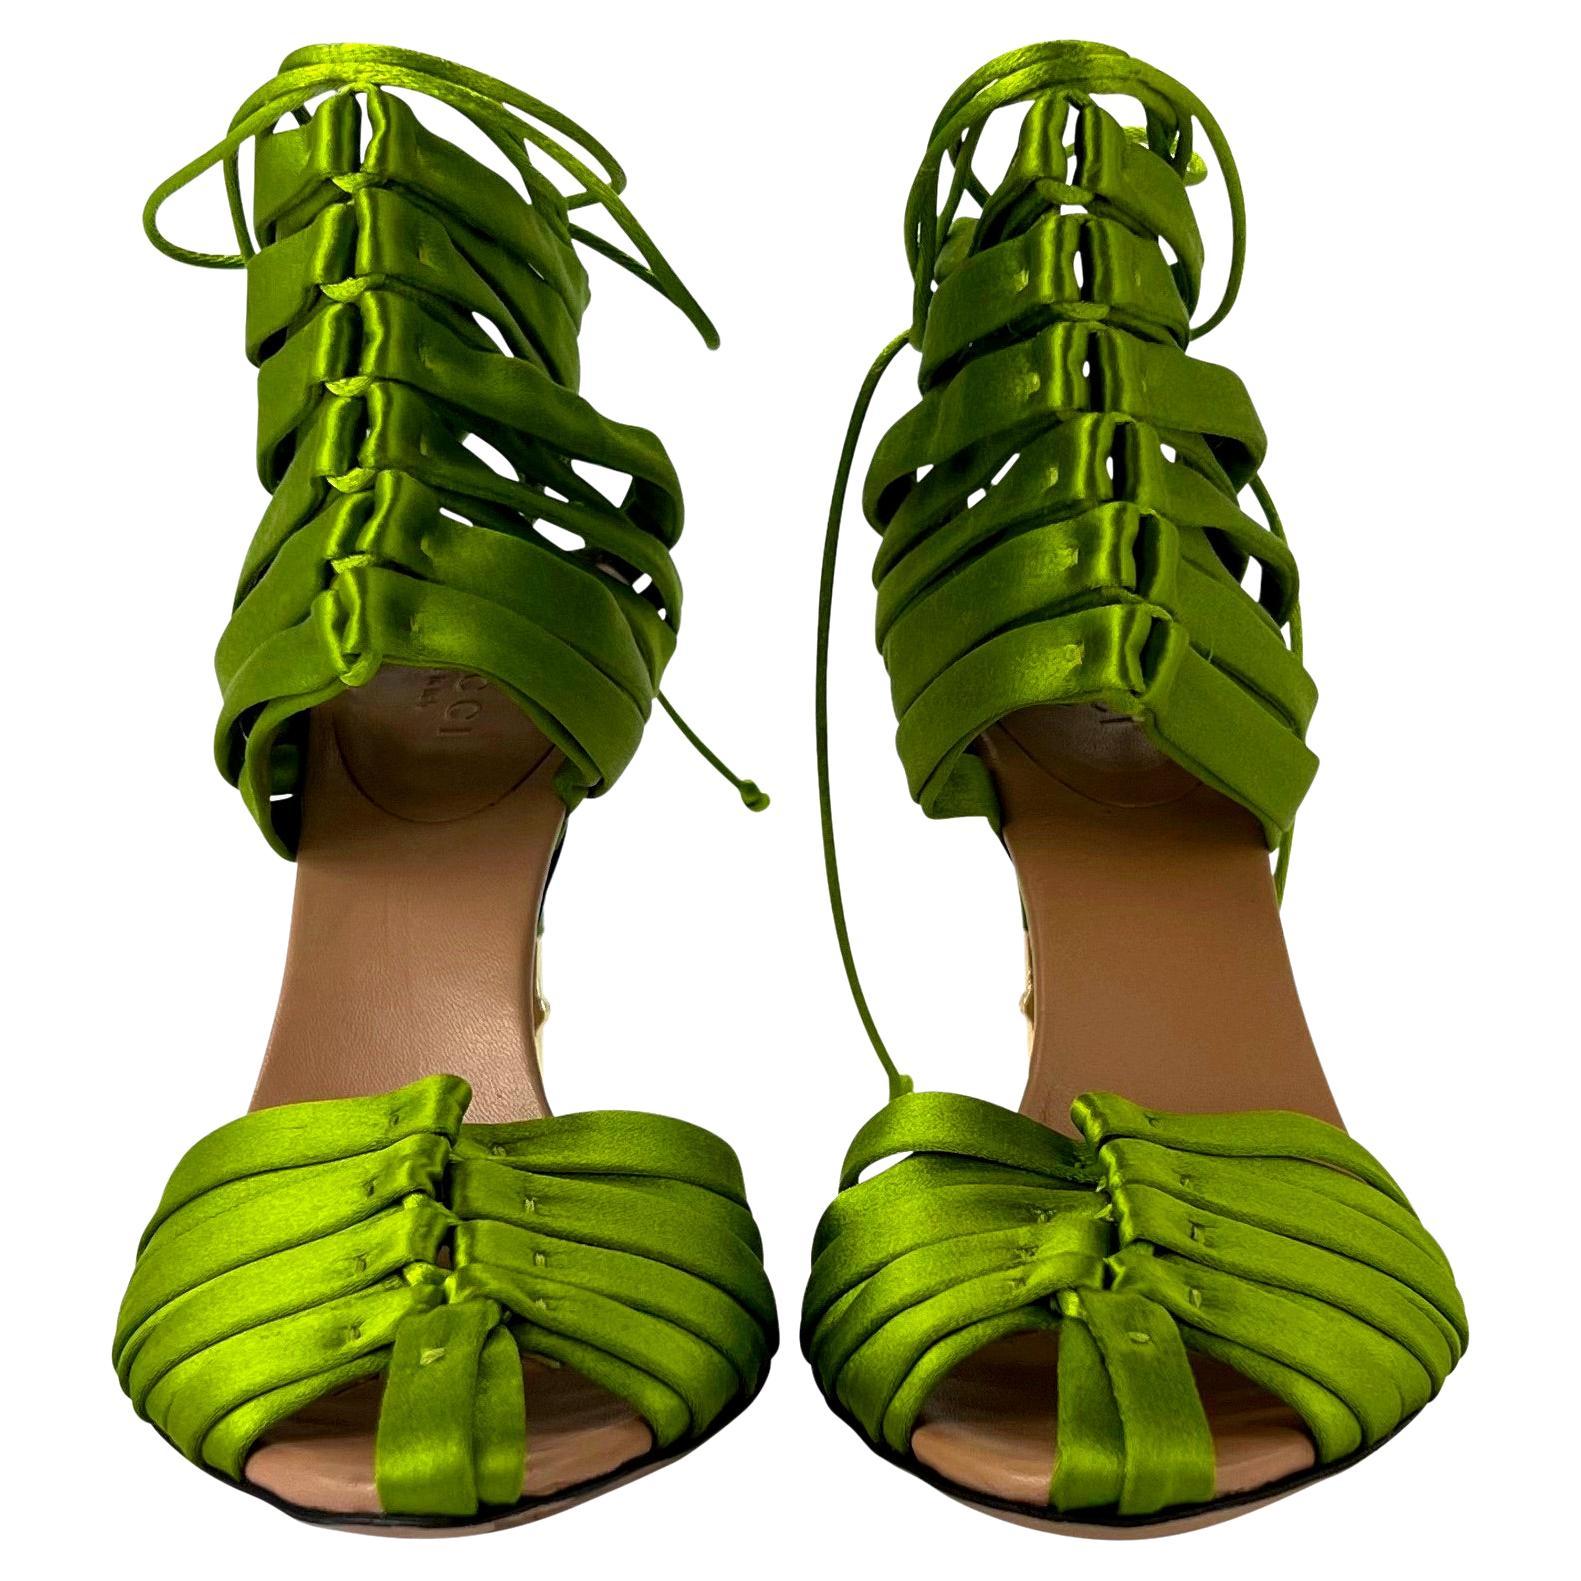 S/S 2004 Gucci by Tom Ford Ad Green Satin Strap Lace-Up Crocodile Heels Size 5 B For Sale 1